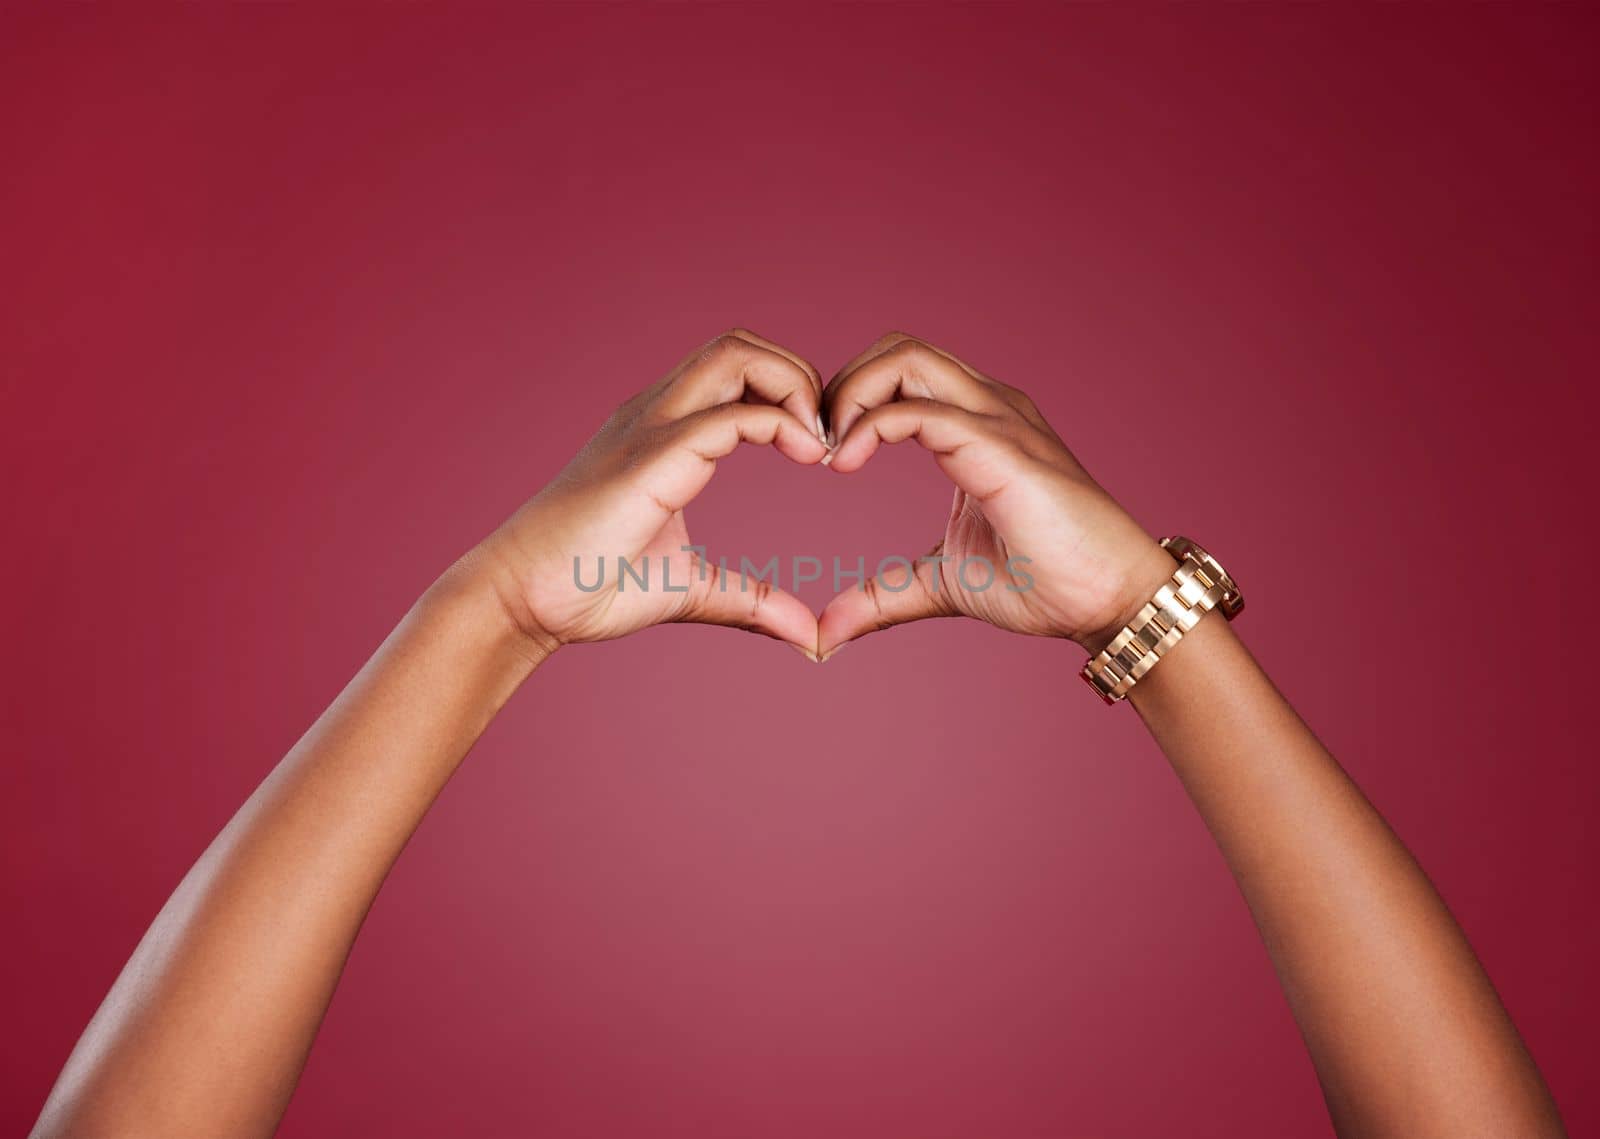 Hands, heart and sign for love, care or relationship in romance against a studio background. Hand in hearty emoji, shape or symbol for romantic gesture, valentines day or emotion on copy space by YuriArcurs